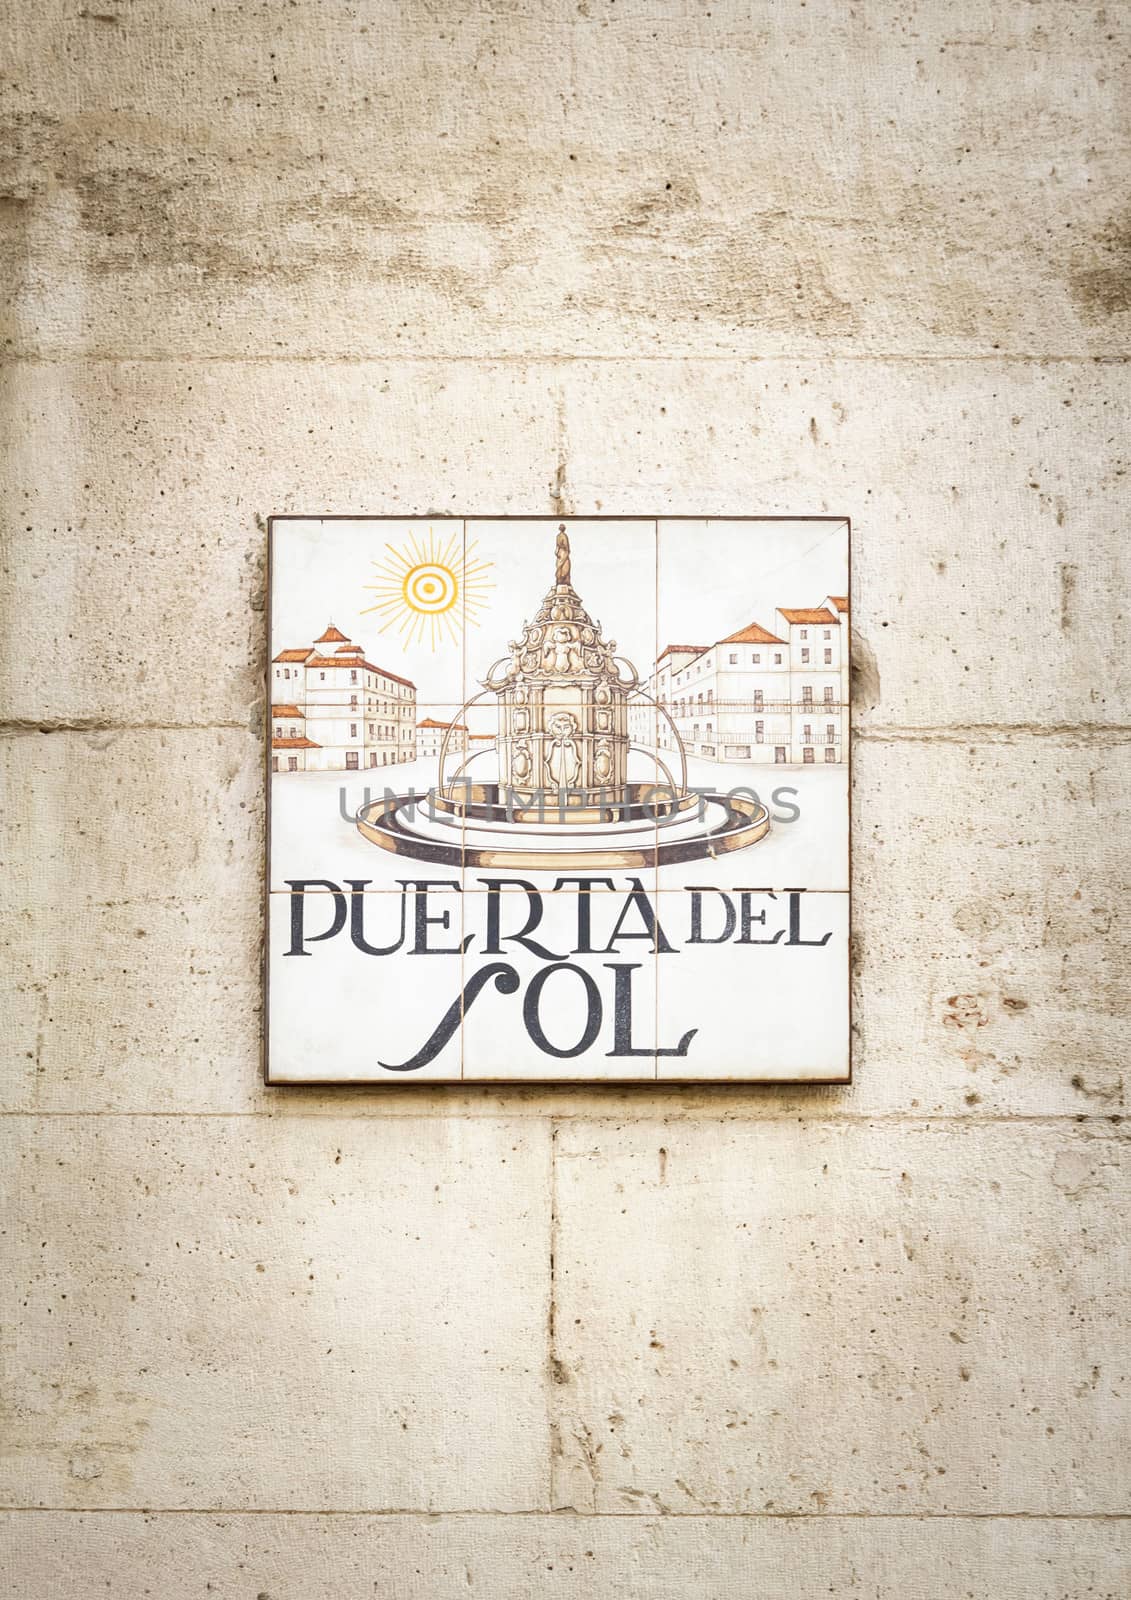 Puerta del Sol sign on stone wall in Madrid, Spain